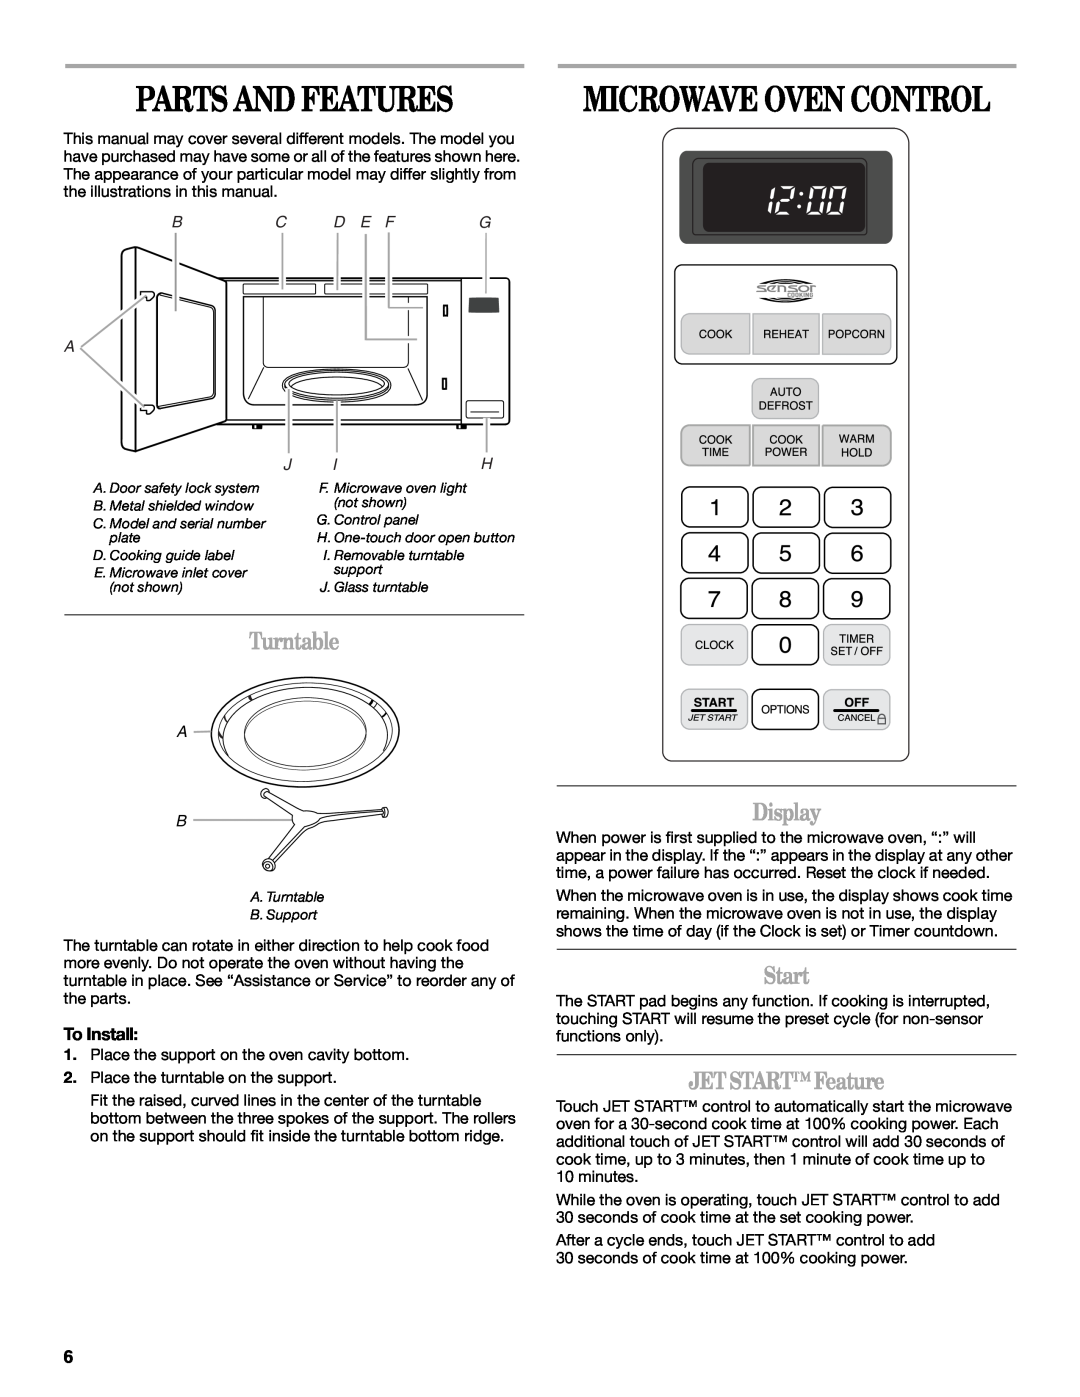 Whirlpool YMT4155SP Parts And Features, Microwave Oven Control, Turntable, Display, Start, JETSTART Feature, D E F, J Ih 